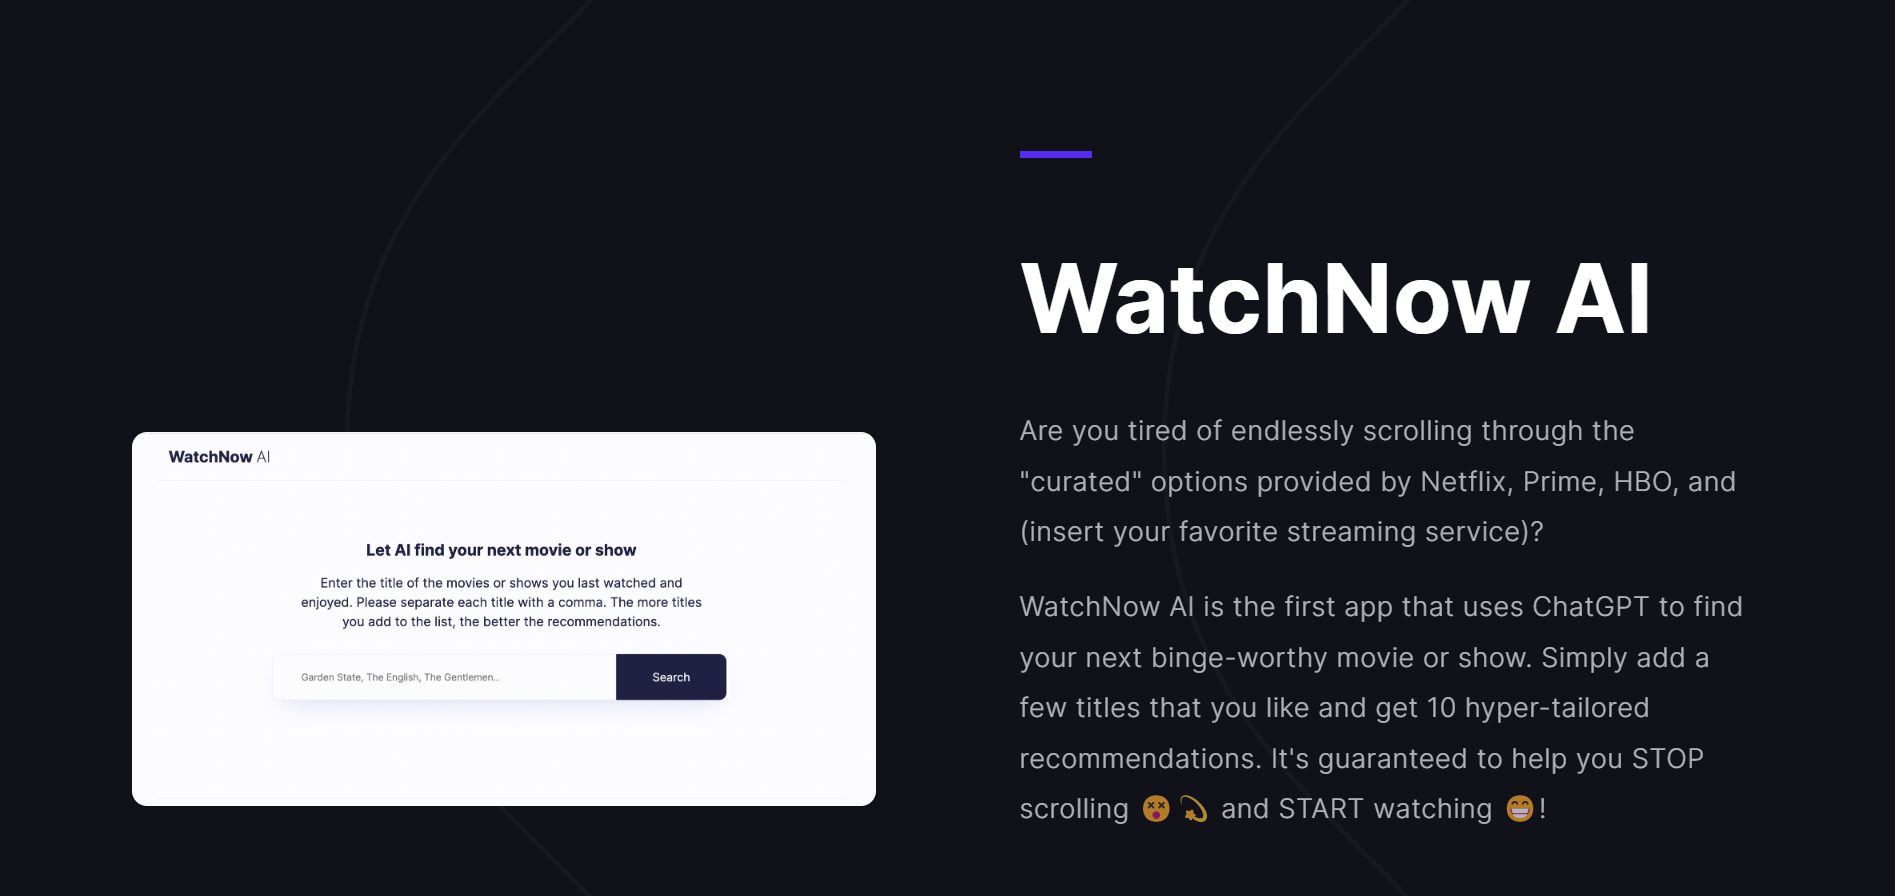 Discover Your Next Favorite Movie or Show with Watchnowai.com – The Ultimate Personalized Recommendation Tool!